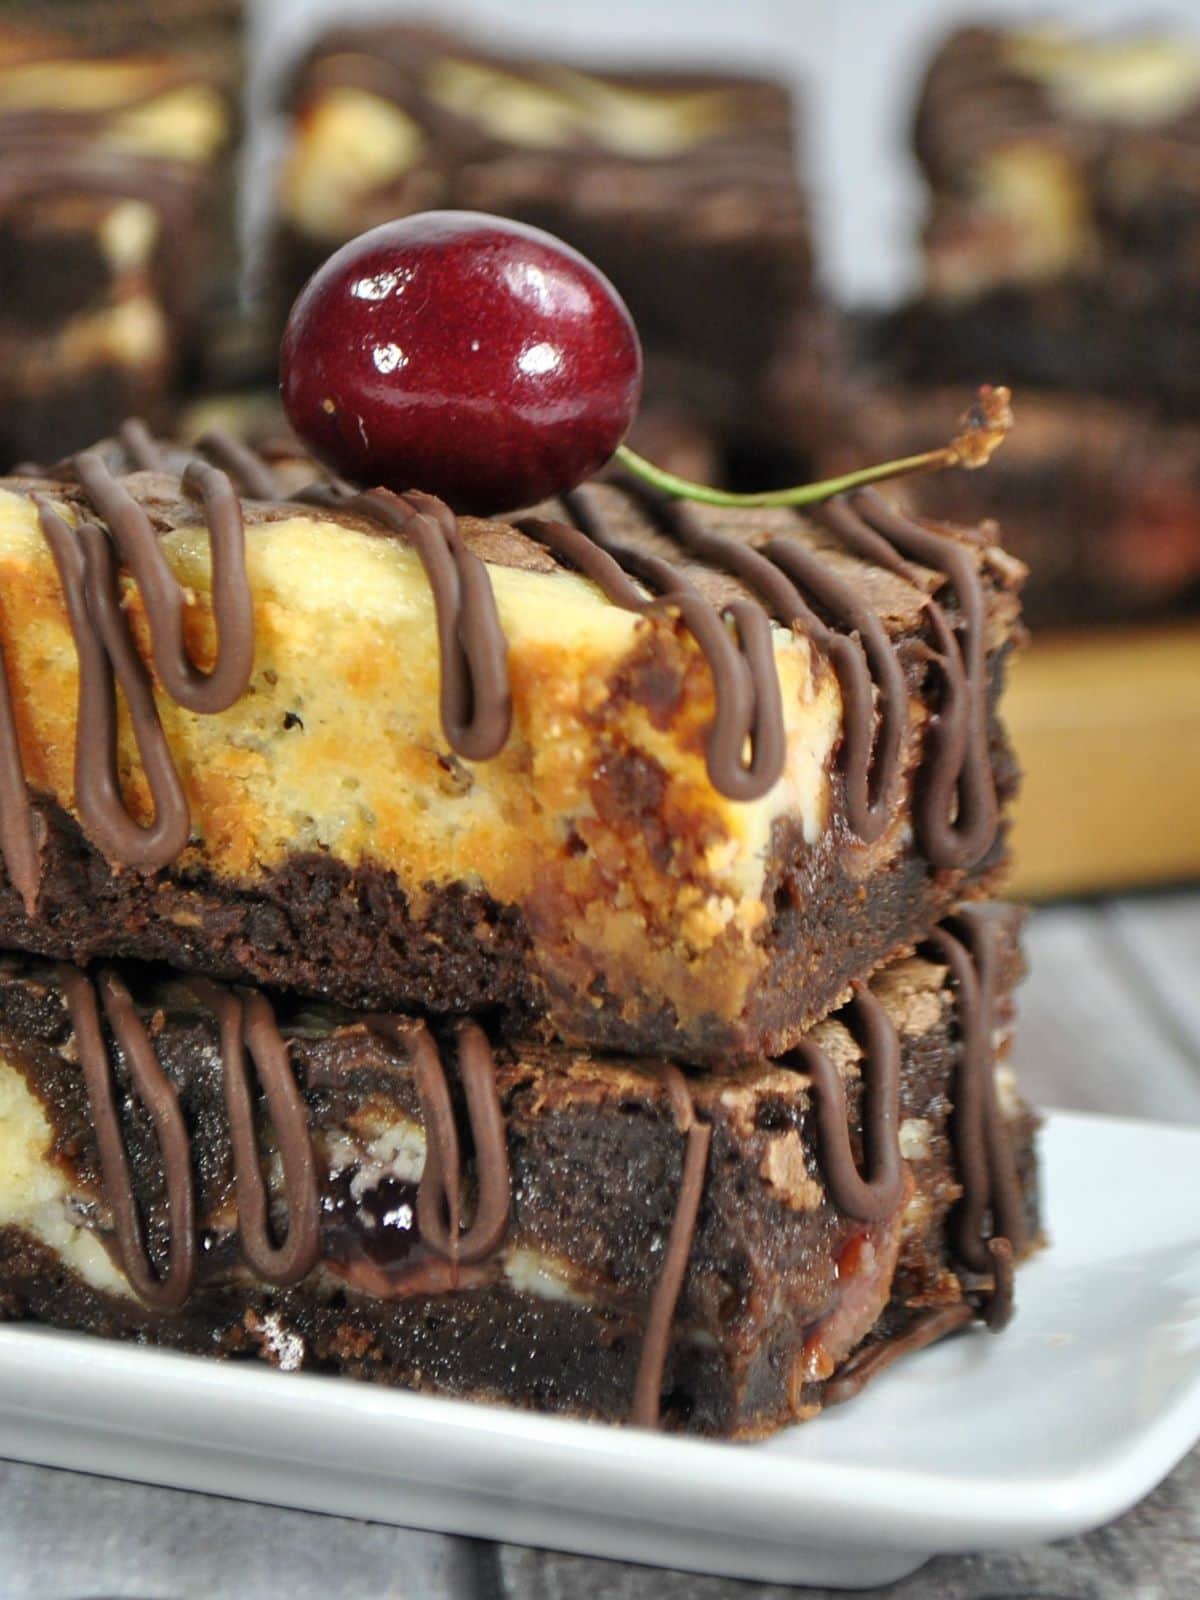 Cherry Pie Brownie Cheesecake Bars with a cherry on top on a plate